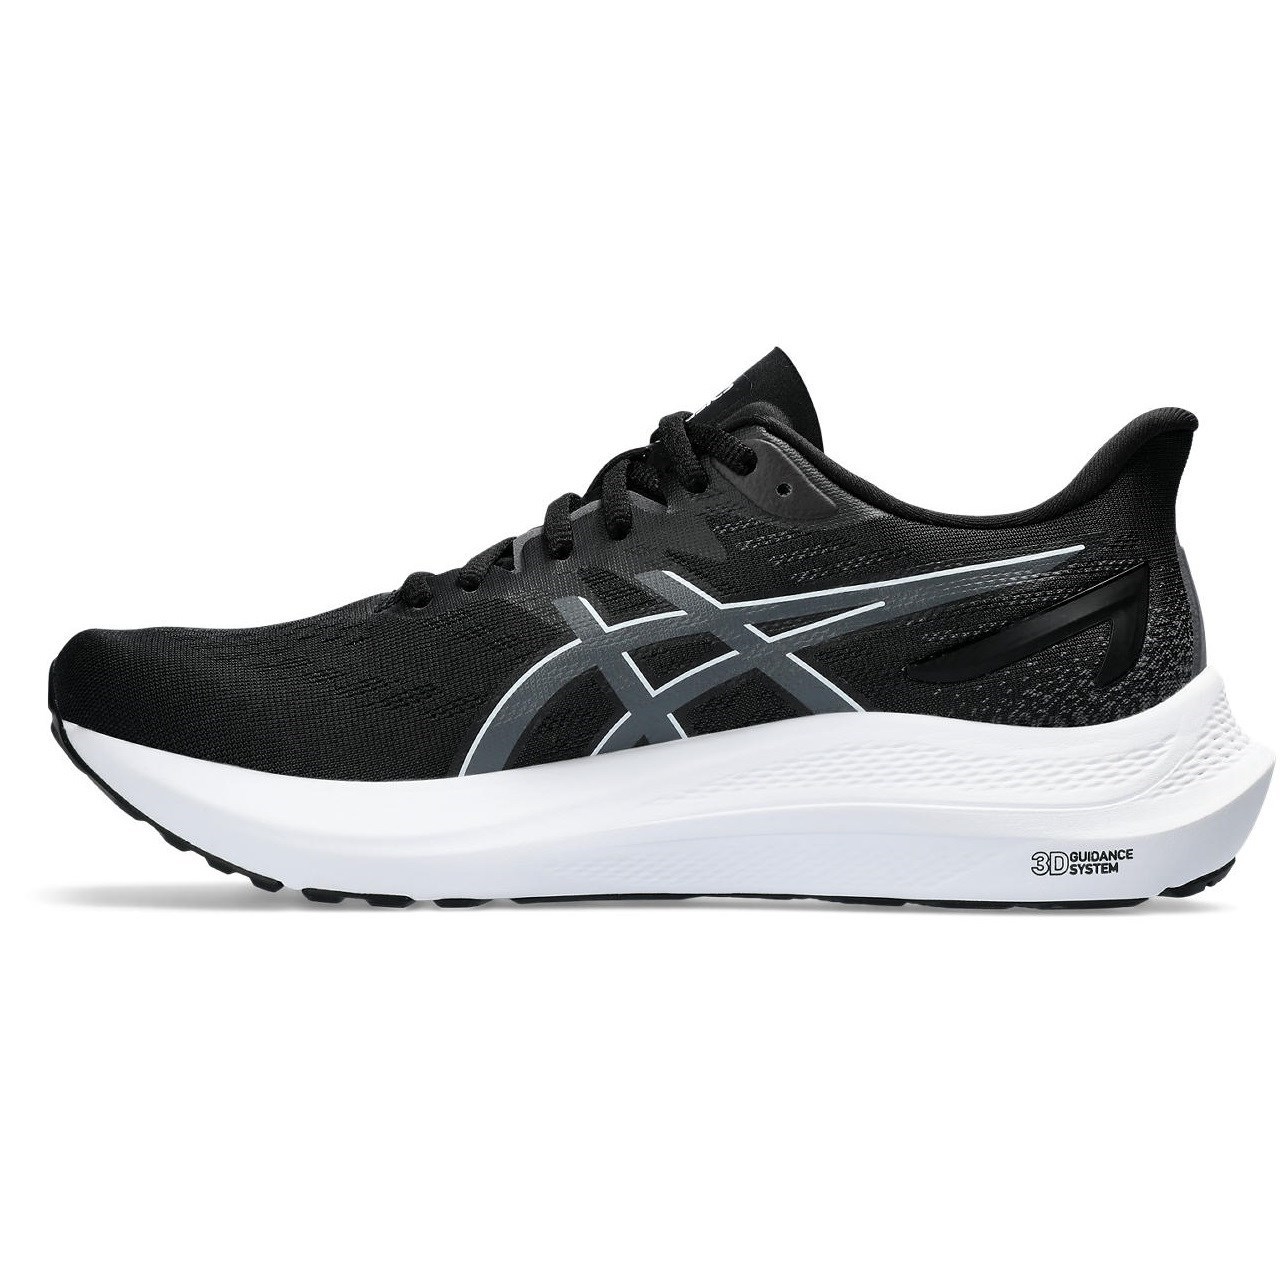 Asics GT-2000 12 - Womens Running Shoes - Black/Carrier Grey | Sportitude